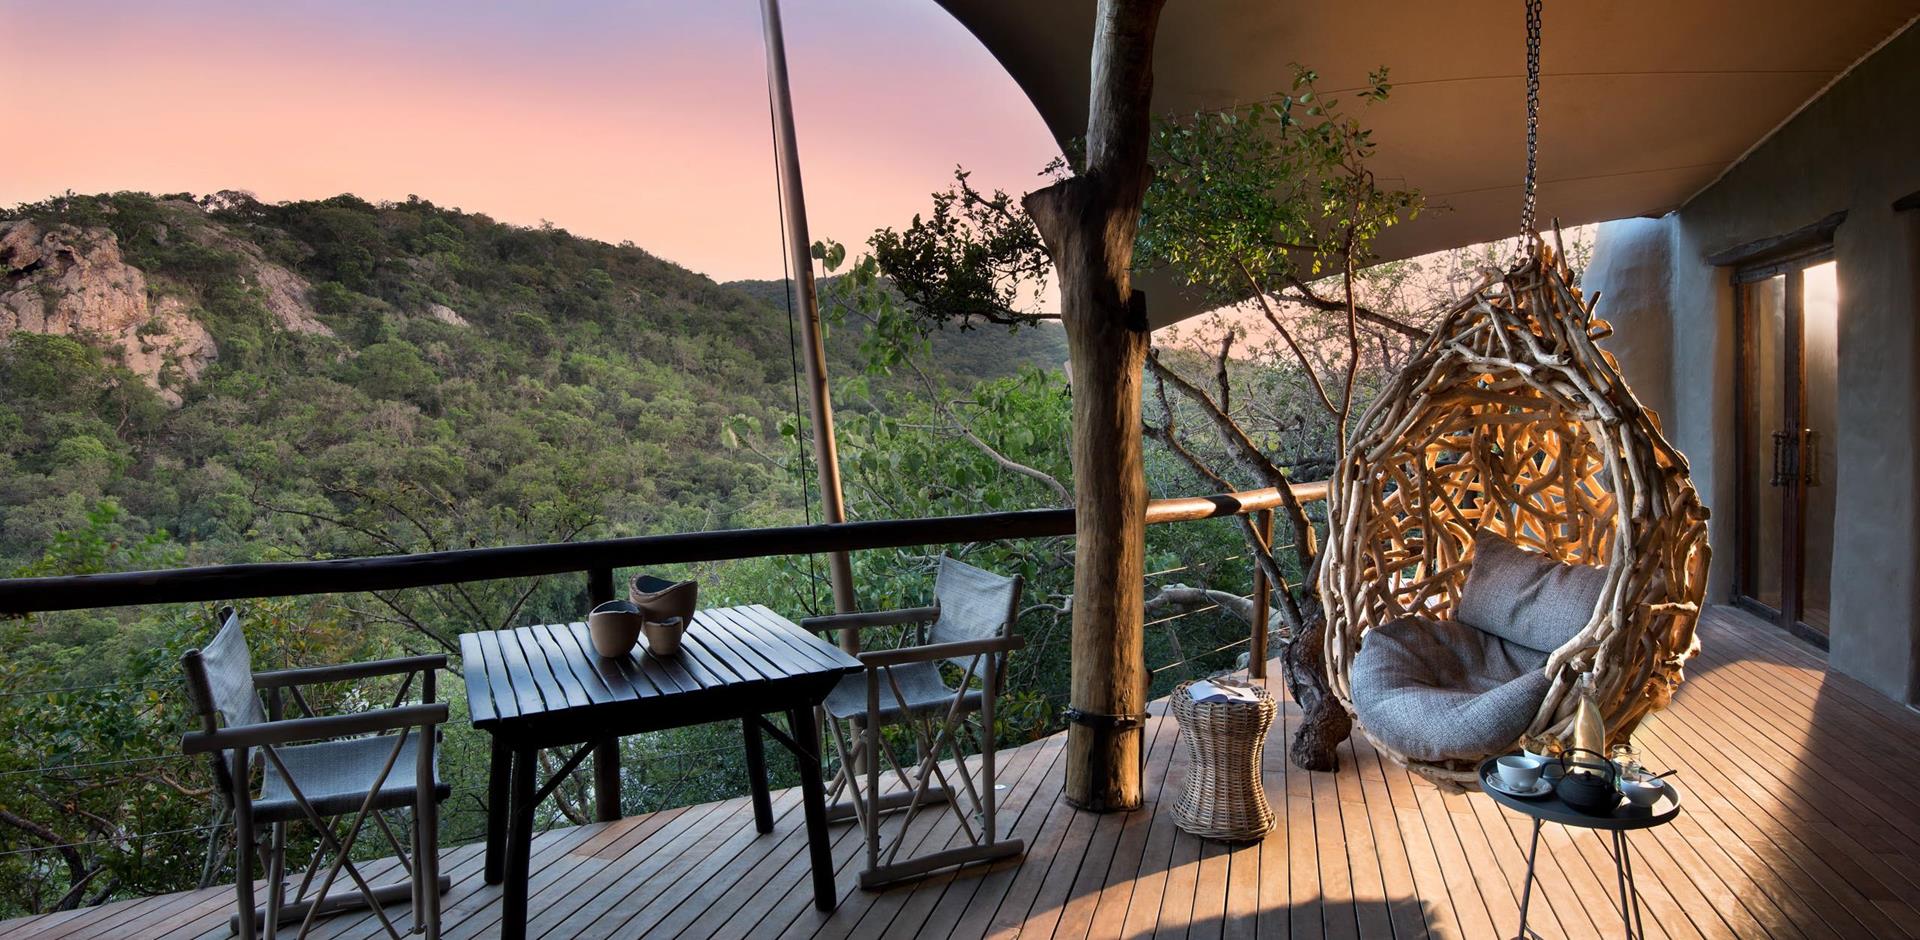 Balcony, andBeyond Phinda Rock Lodge, South Africa, A&K